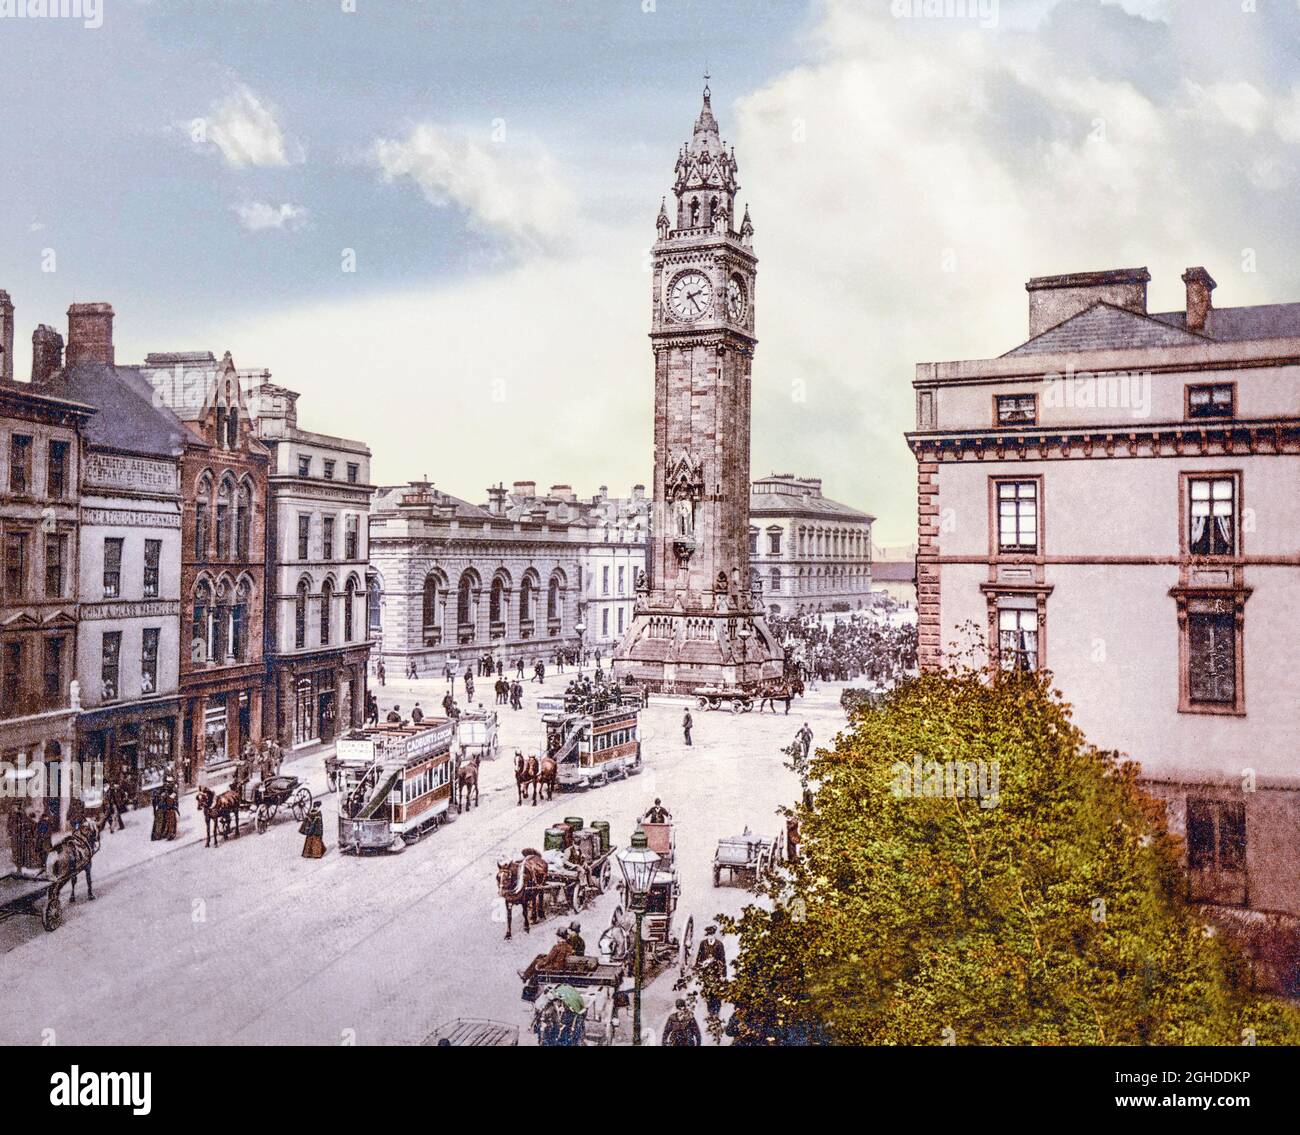 An early 20th century  view of High Street and the Albert Memorial Clock (more commonly referred to as the Albert Clock) situated at Queen's Square in Belfast, Northern Ireland. It was completed in 1869 and is one of the best known landmarks of Belfast. Stock Photo